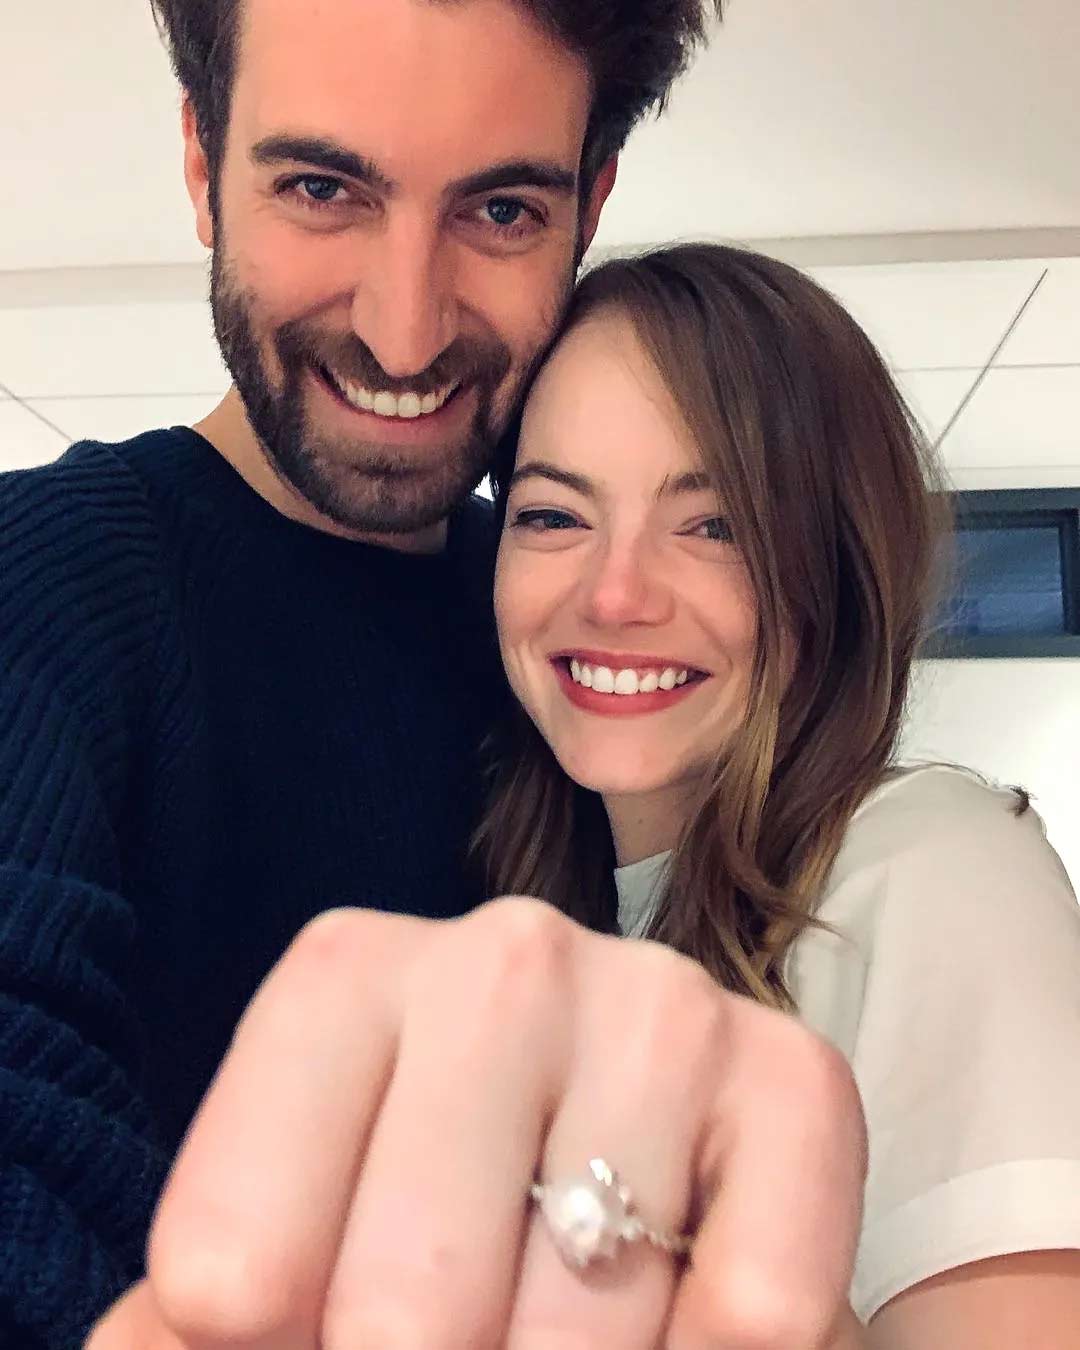 Mc Cary made an announcement on Instagram that the two are engaged.